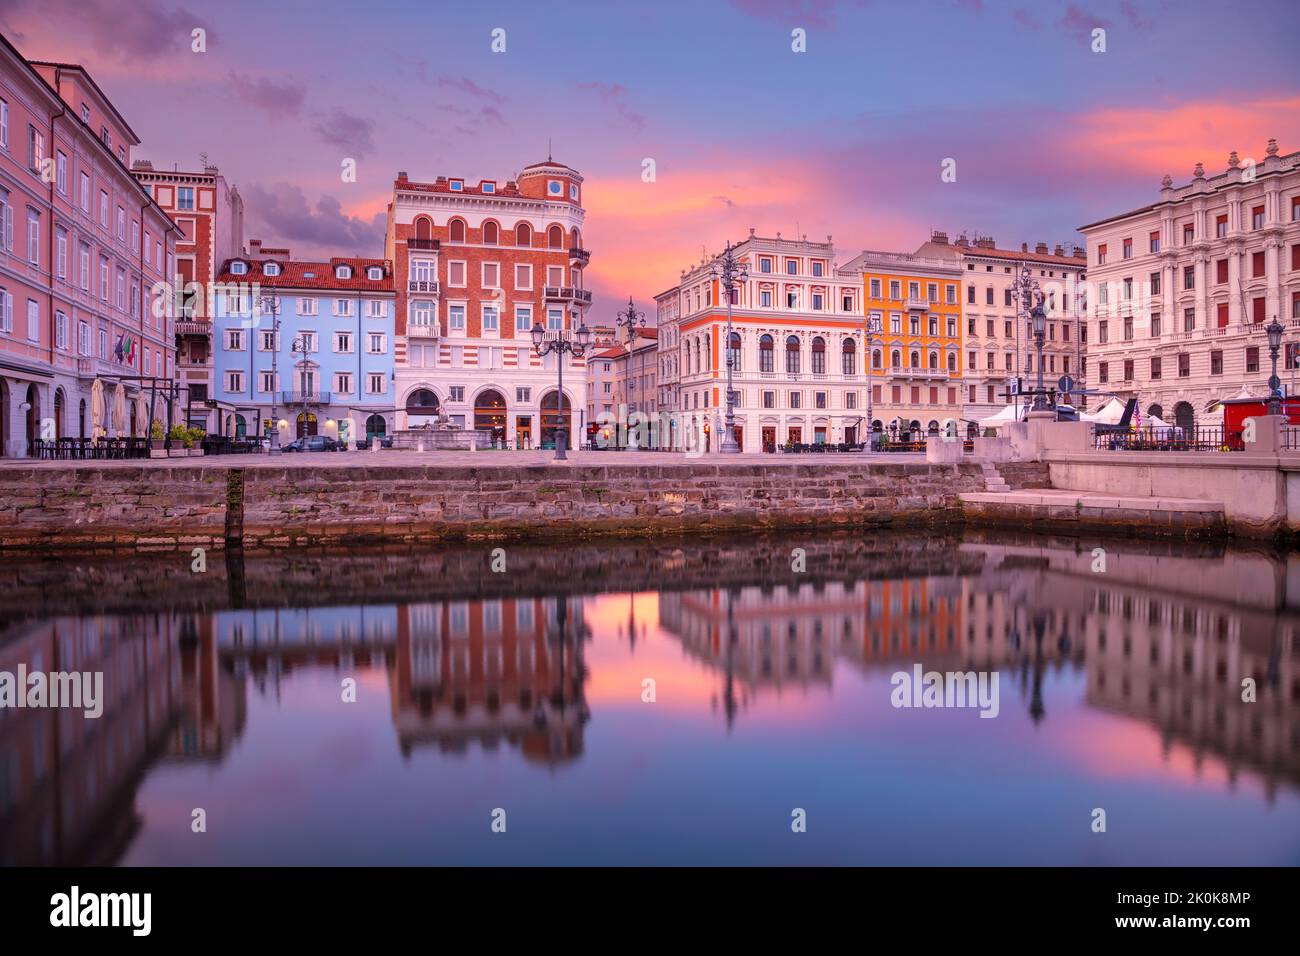 Trieste, Italy. Cityscape image of downtown Trieste, Italy at sunrise. Stock Photo